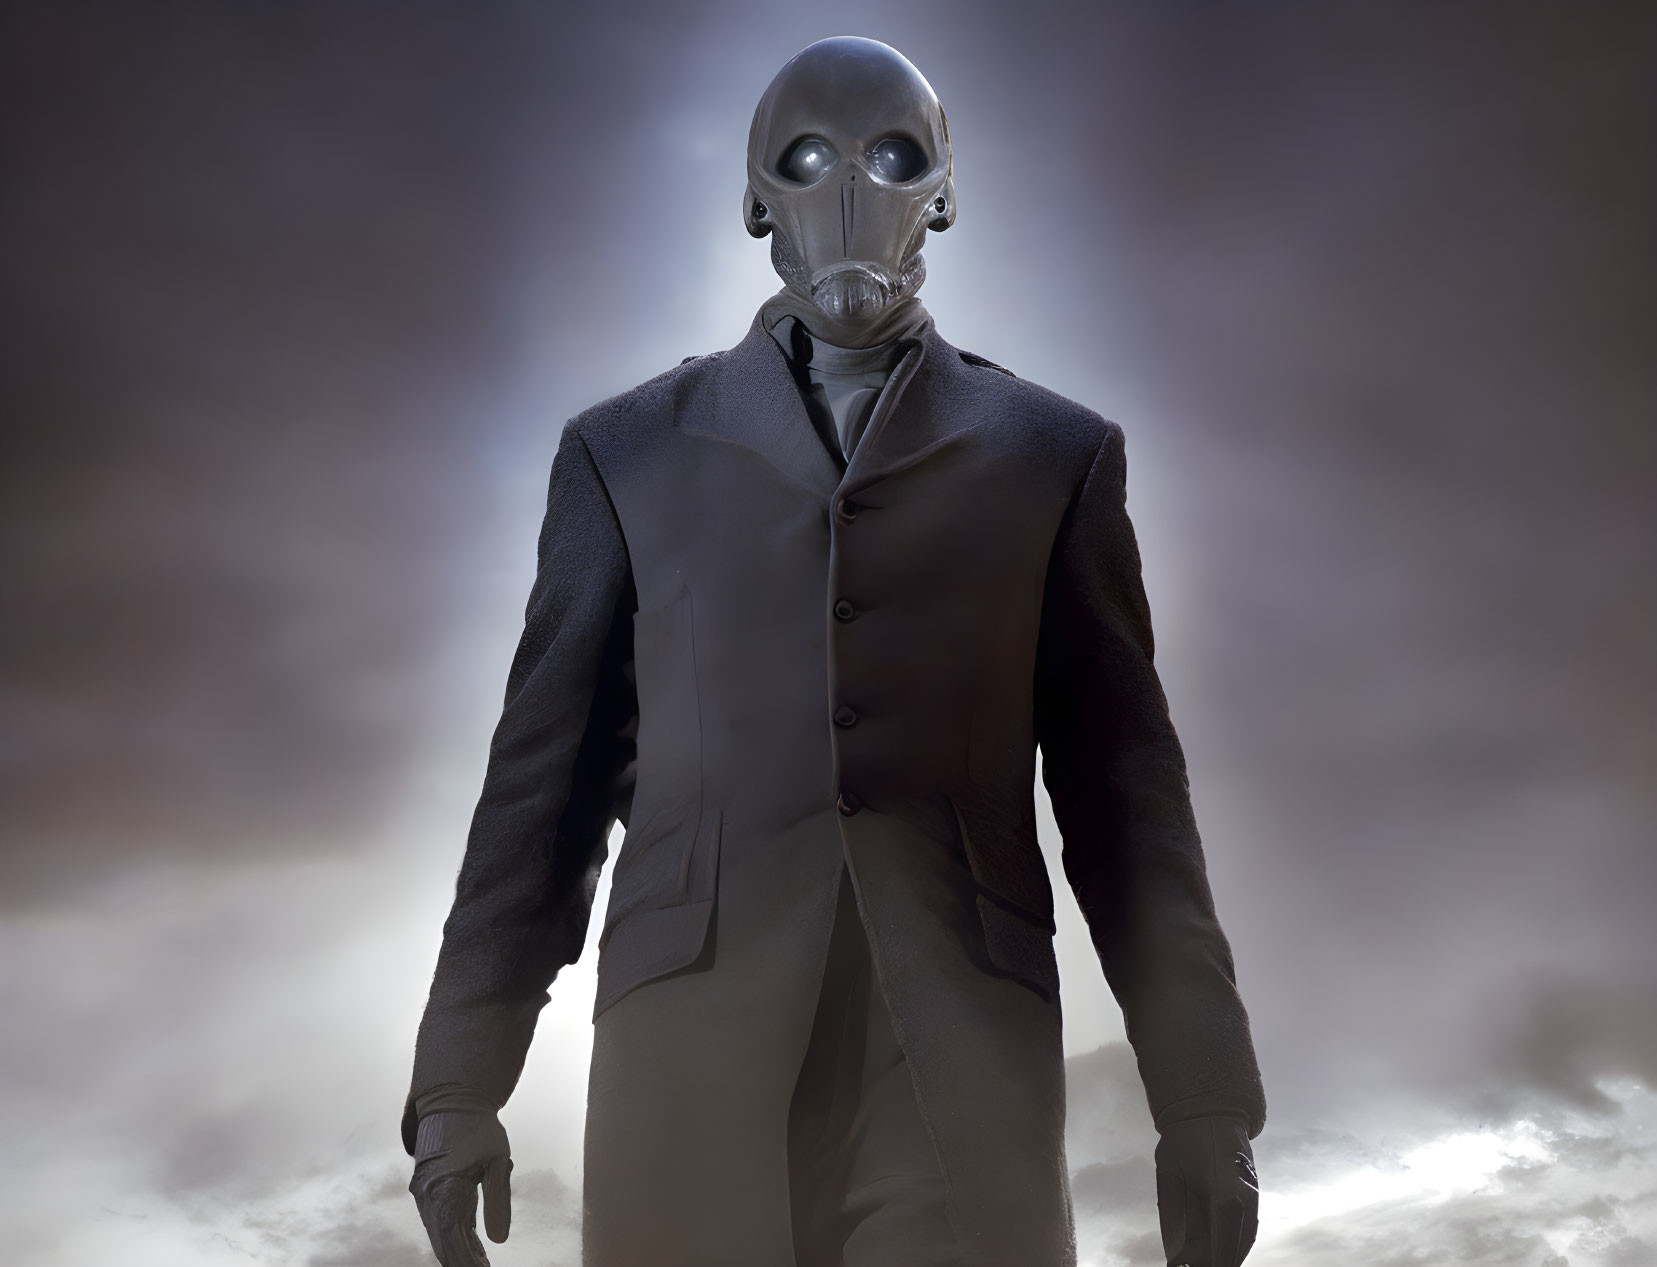 Person in dark suit with vintage gas mask against cloudy backdrop